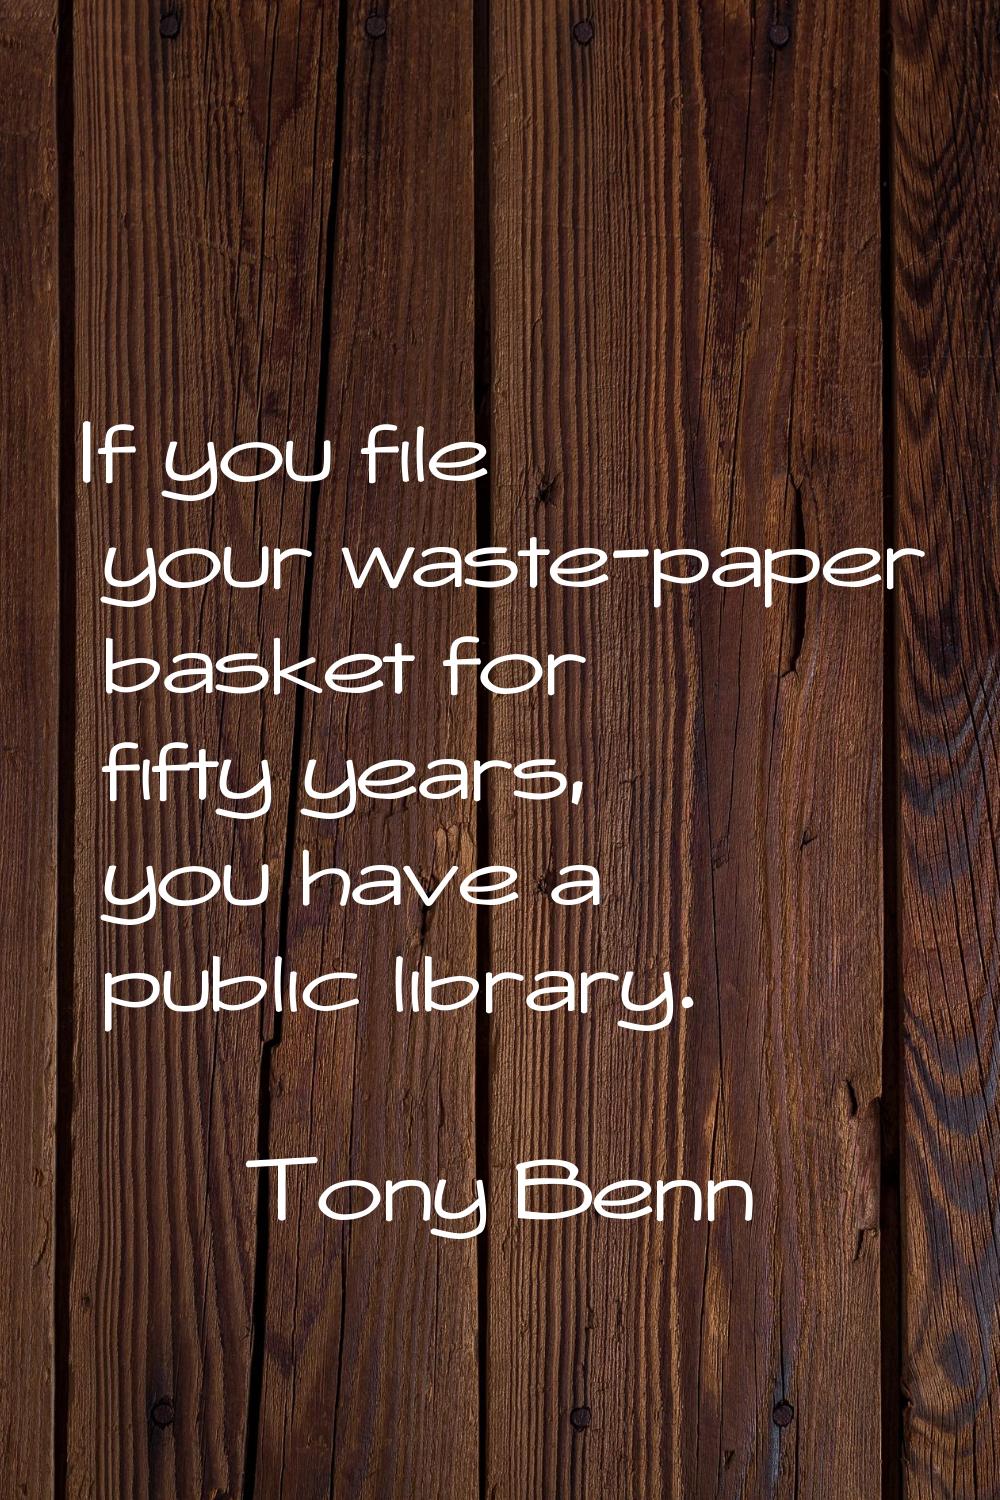 If you file your waste-paper basket for fifty years, you have a public library.